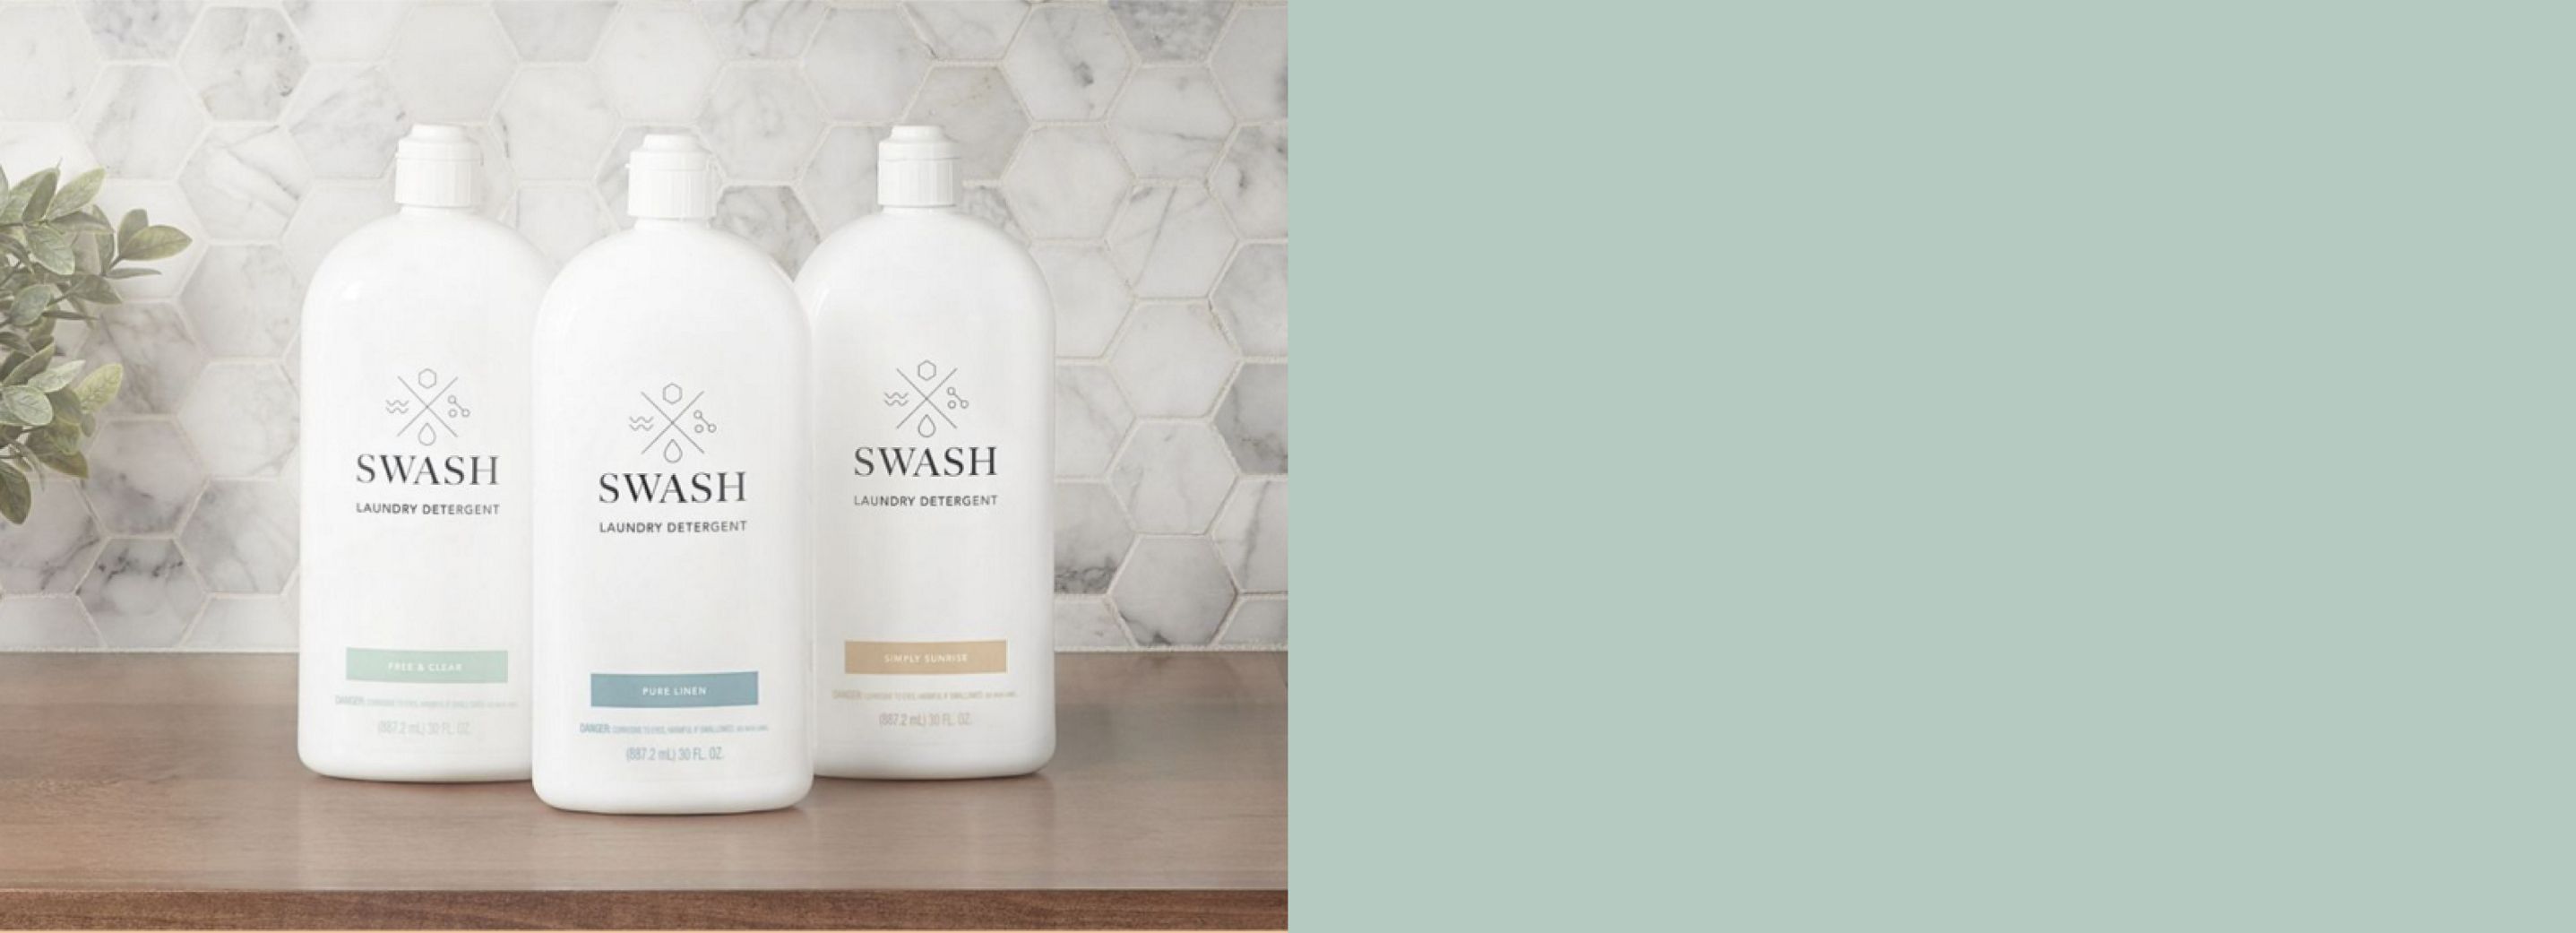 Three bottles of Swash Laundry Detergent on a wooden shelf.  